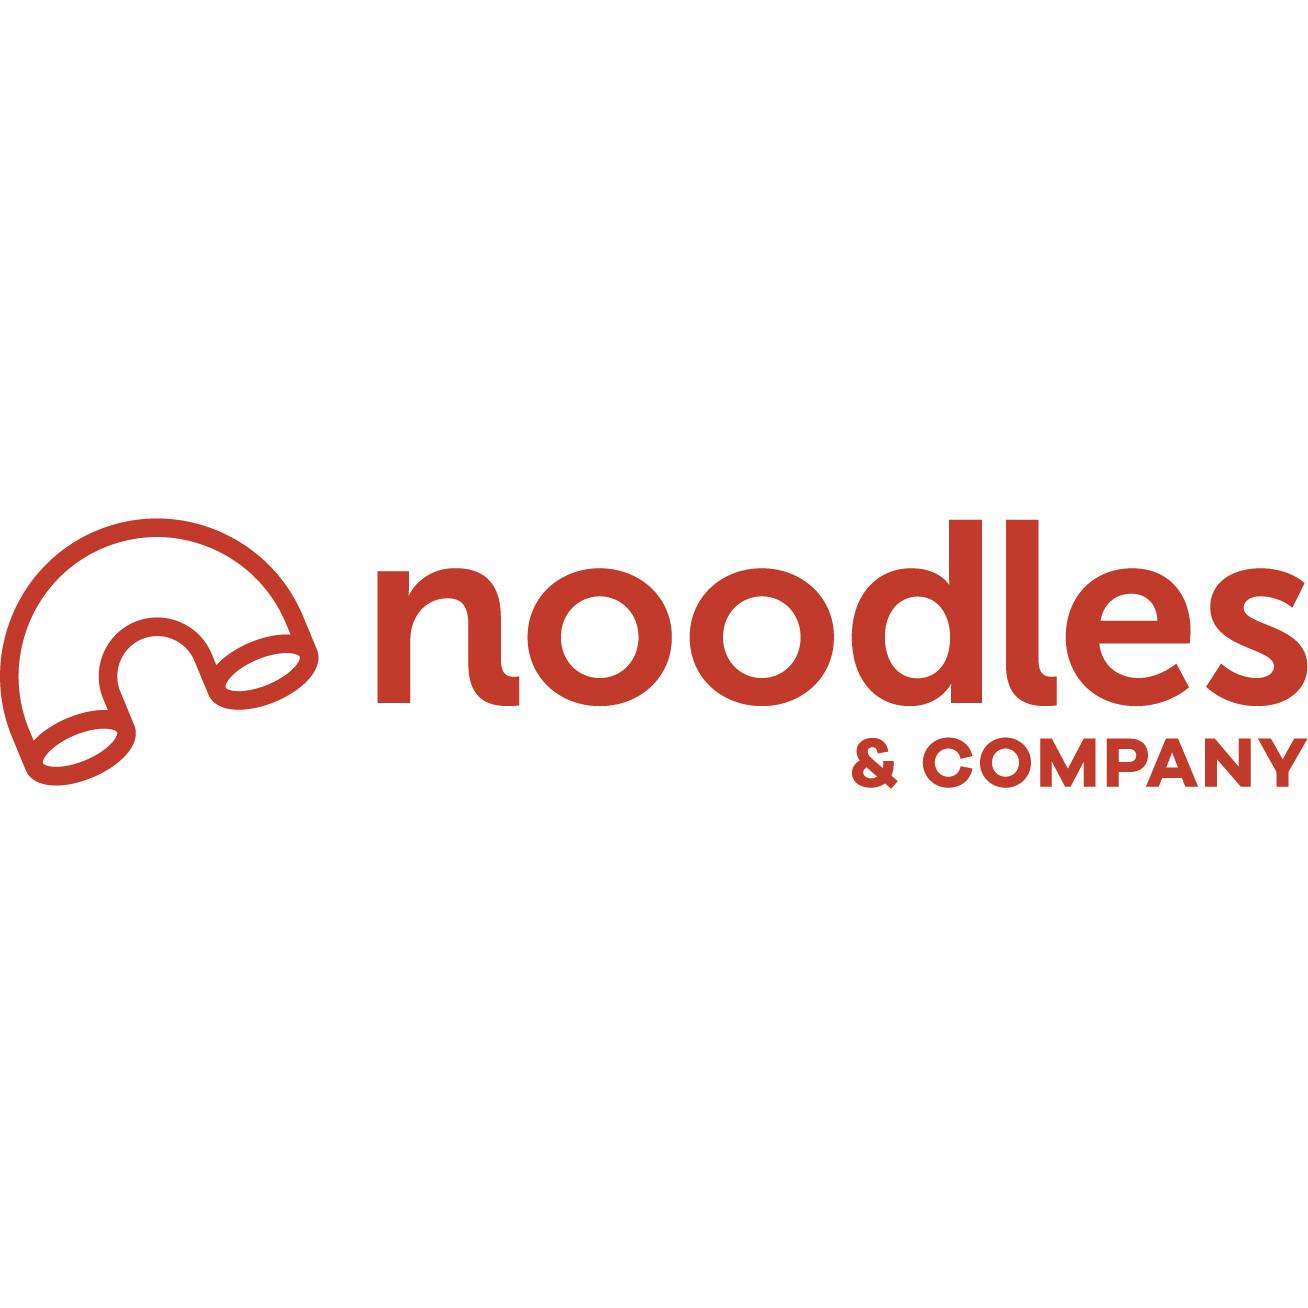 Noodles & Company - Ames Menu and Delivery in Ames IA, 50010